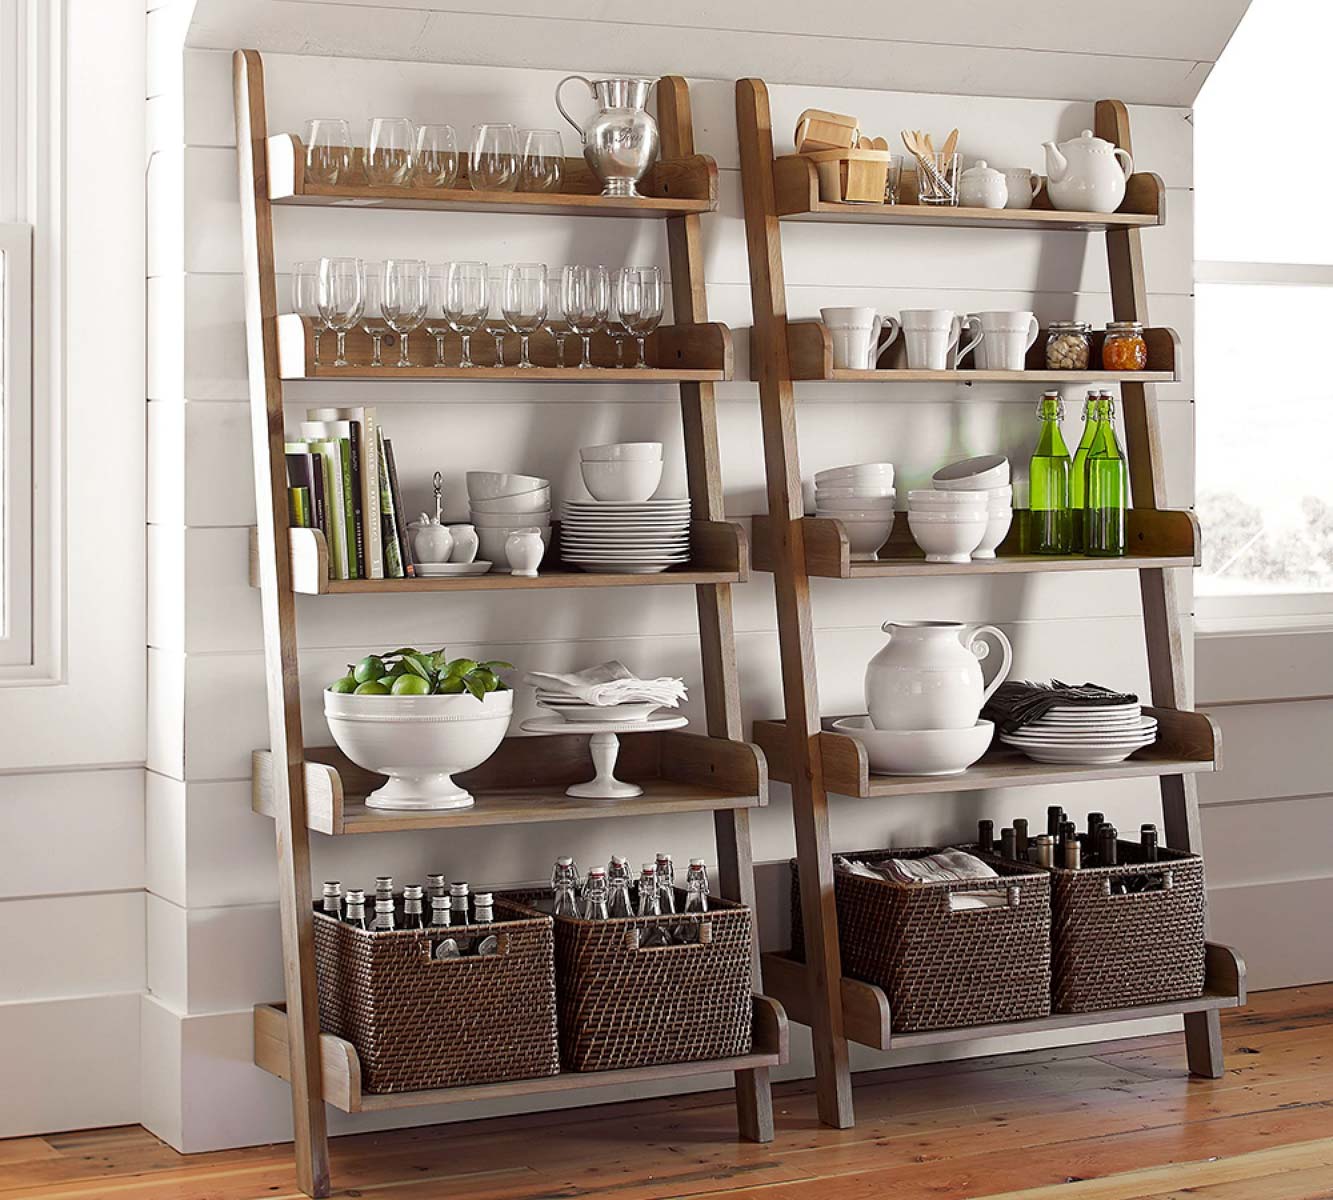 Ladder shelf with dishes, serving pieces, and other kitchenware stored on the shelves